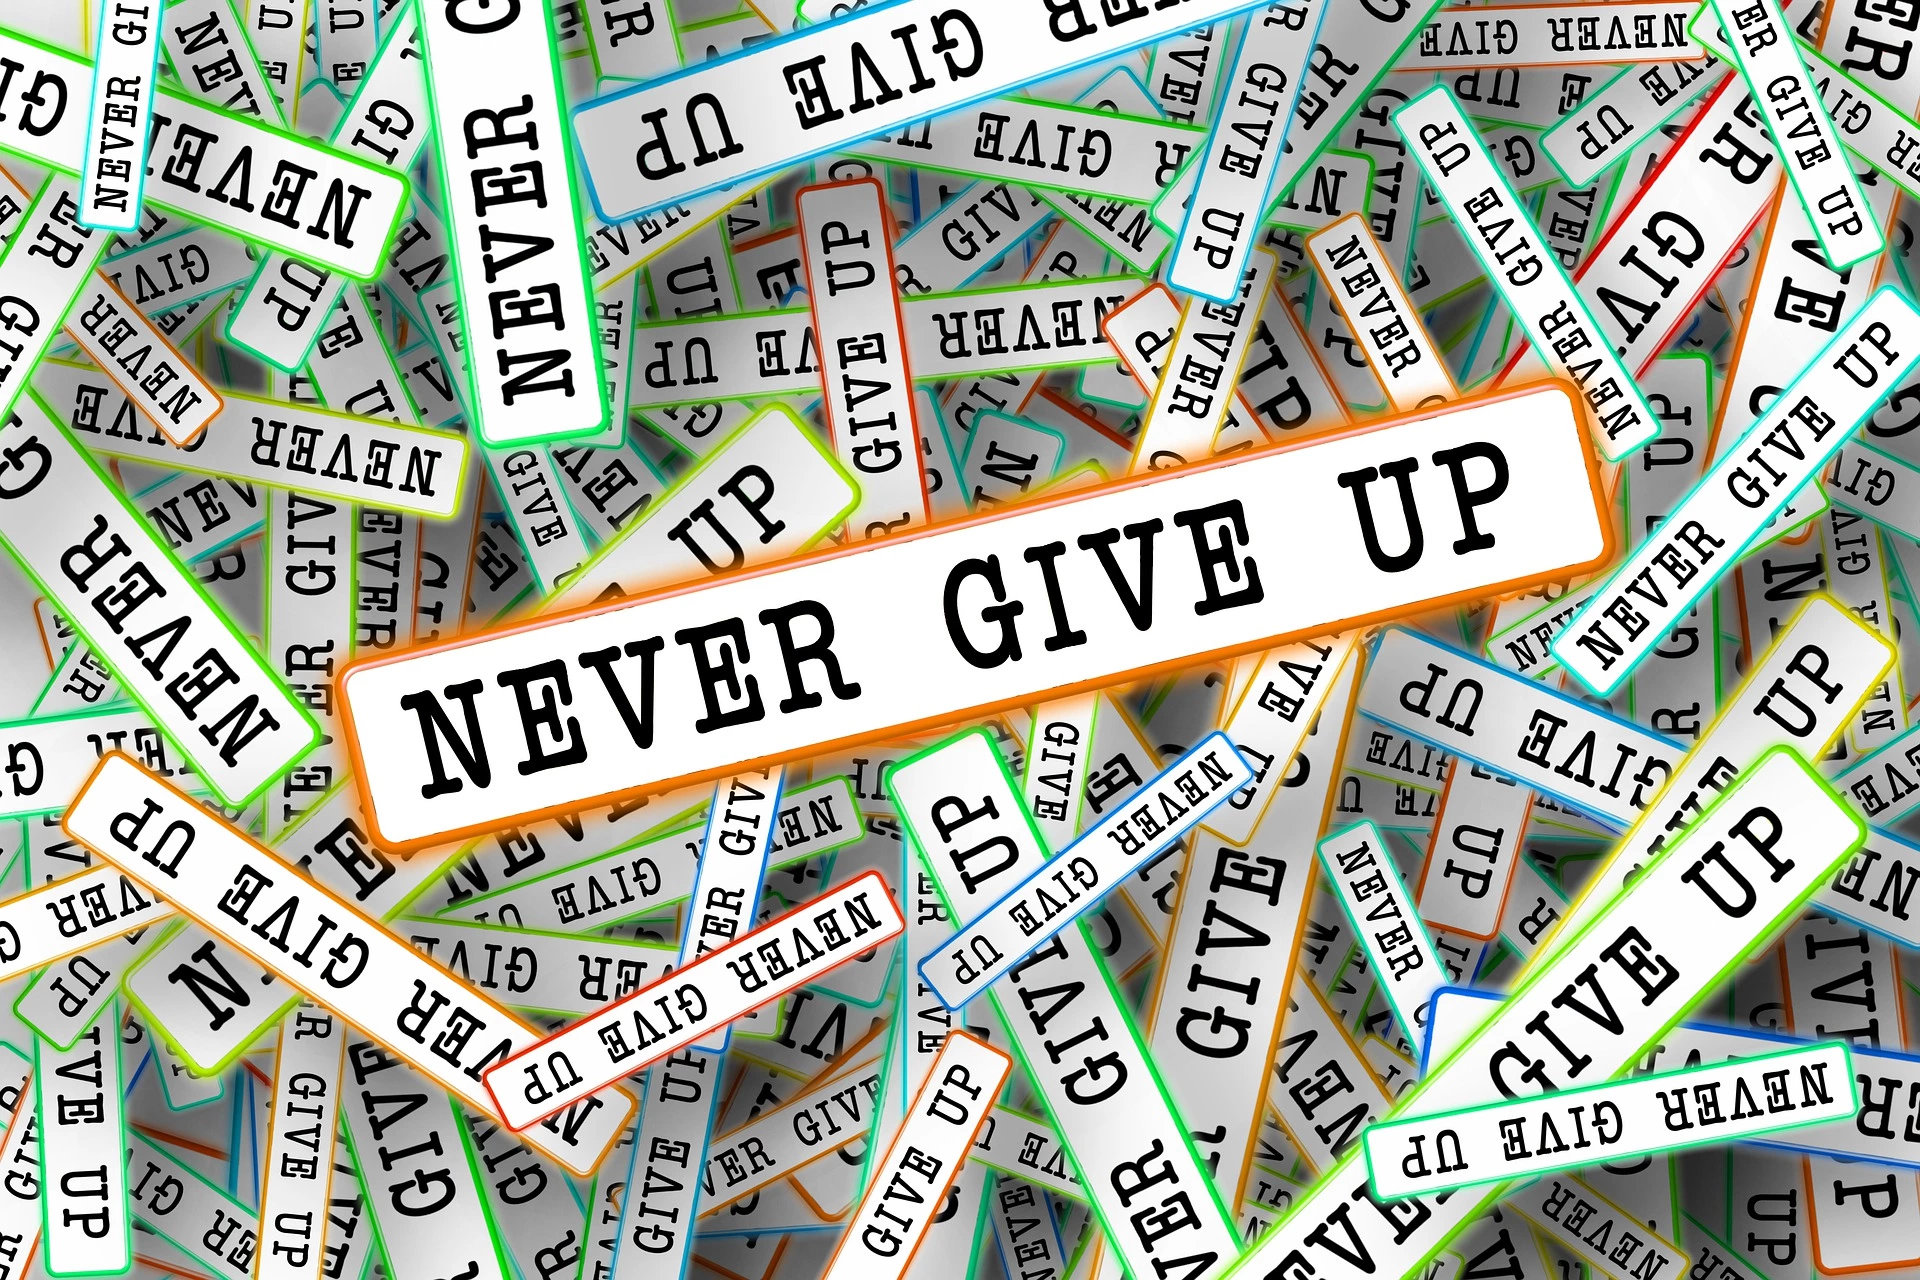 Never give up - affiliate-marketing